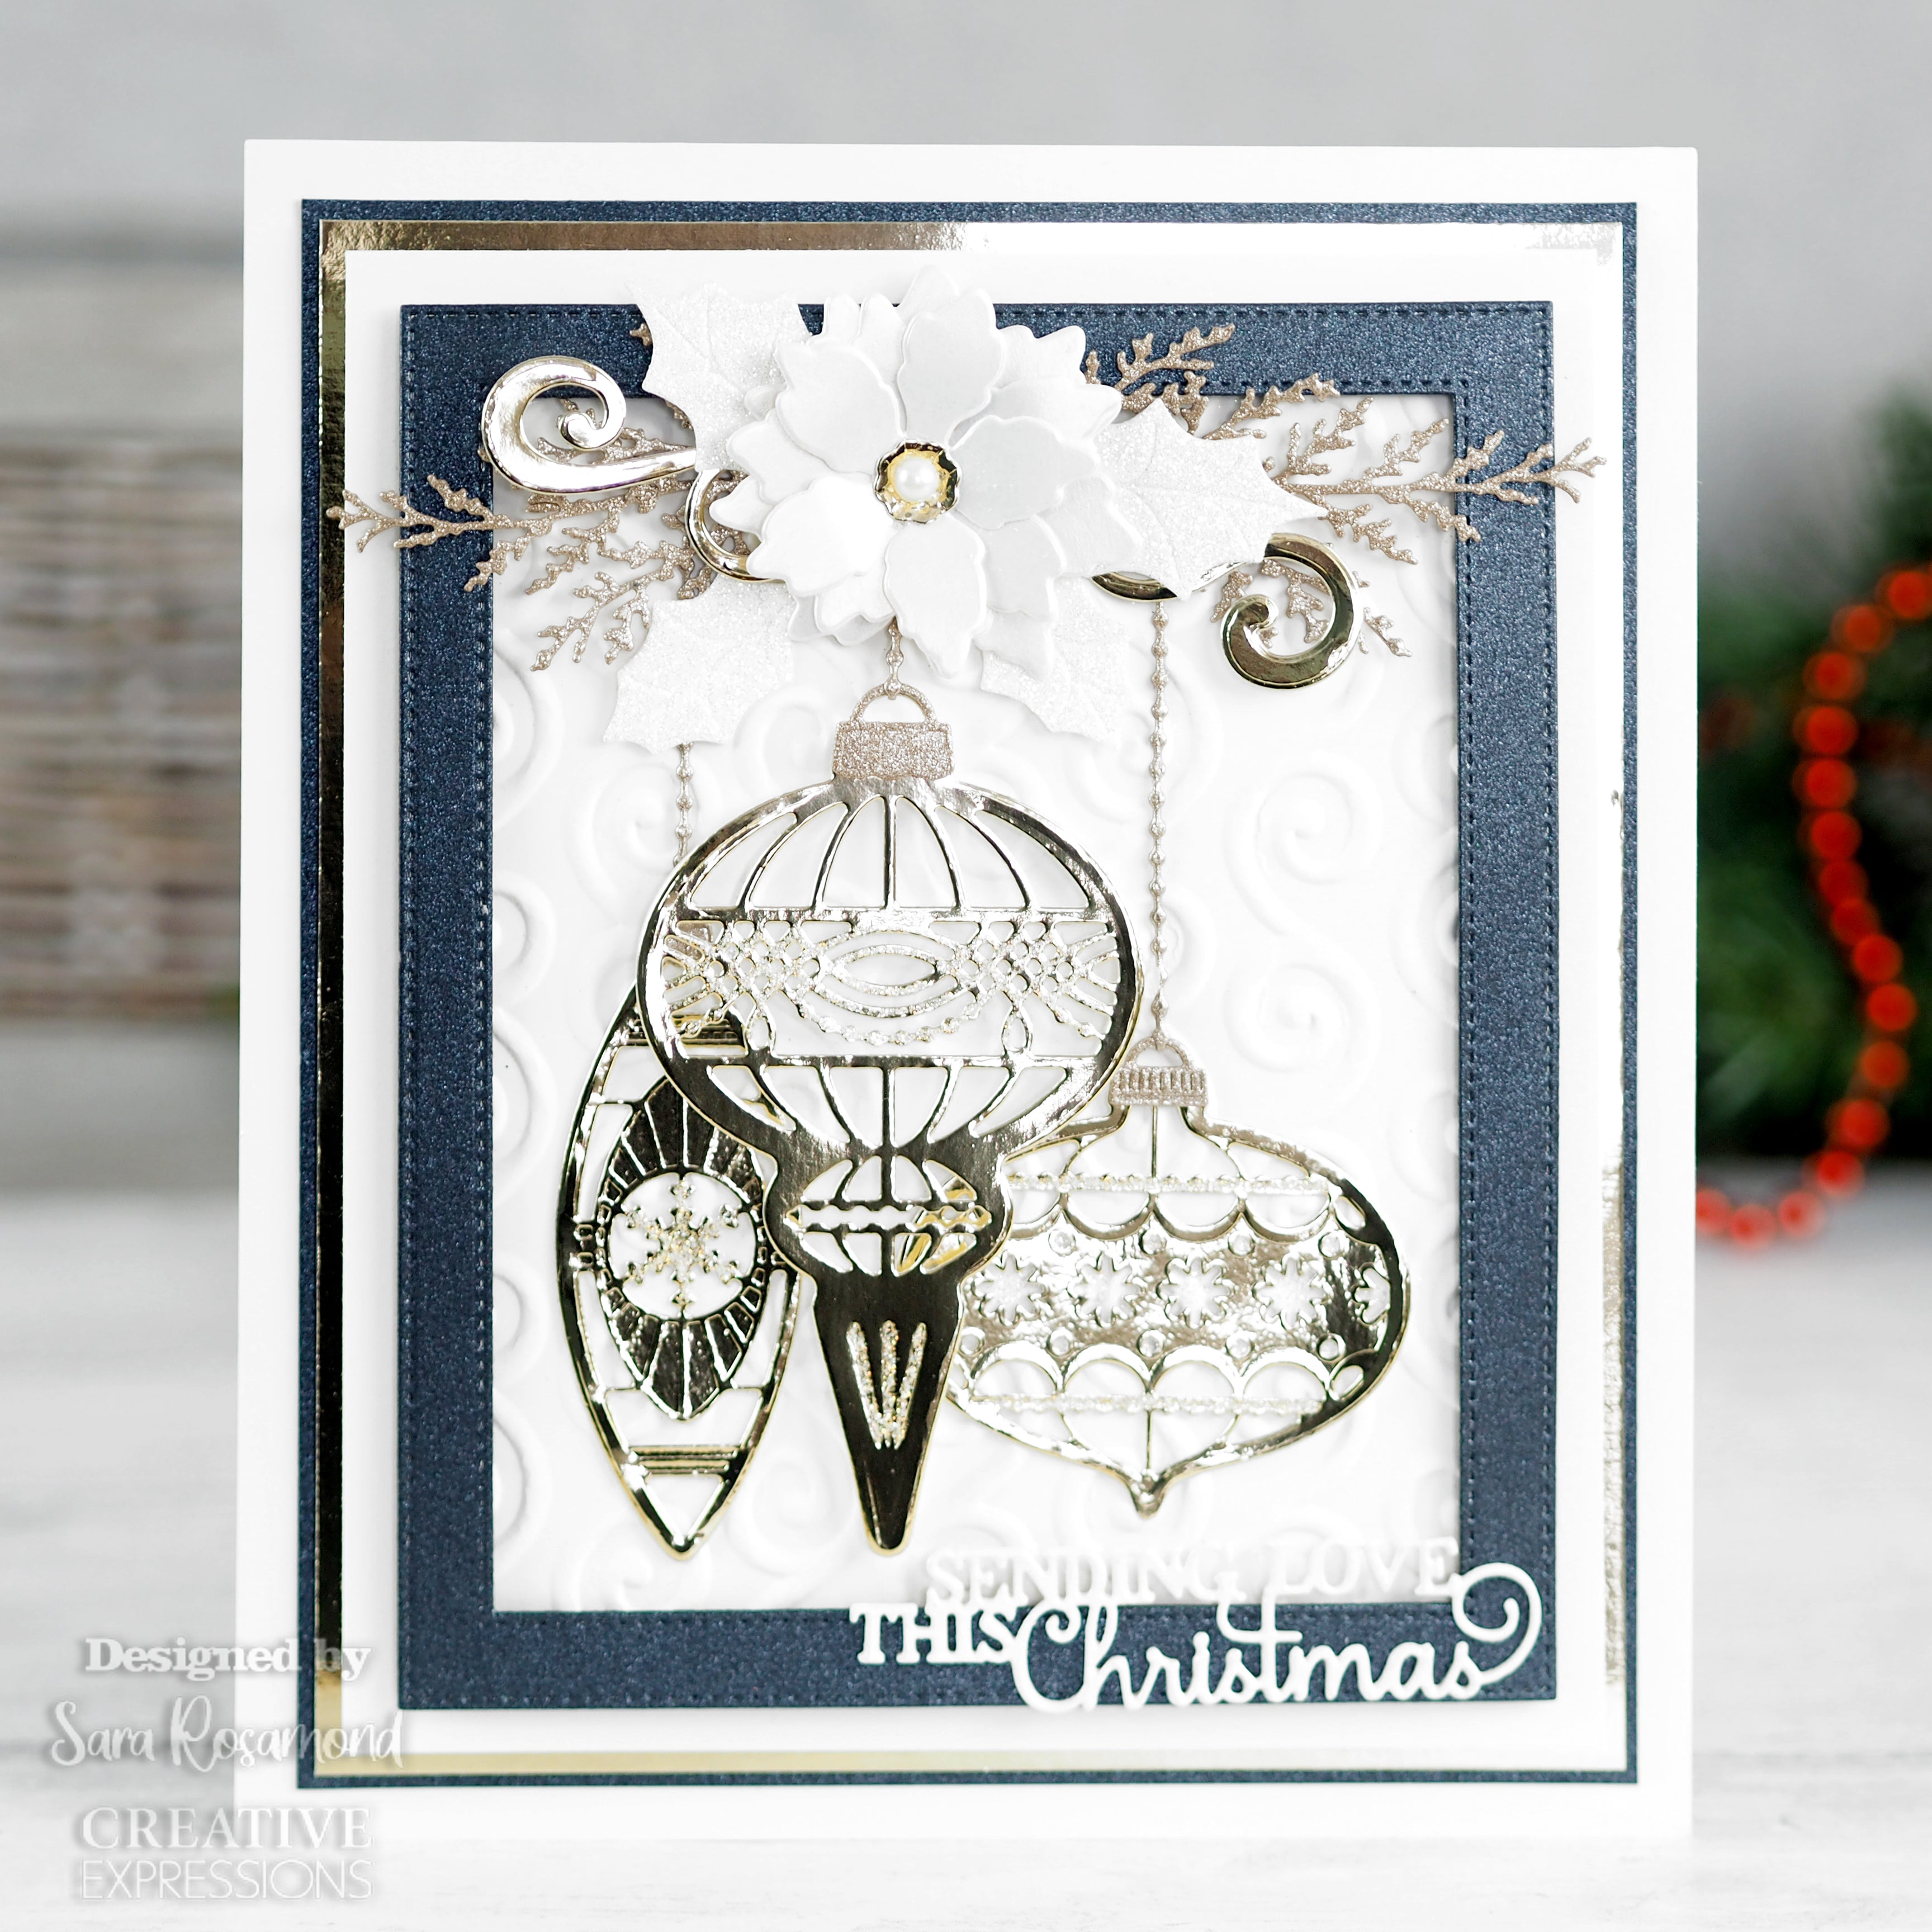 Creative Expressions Sue Wilson Snowflake Baubles